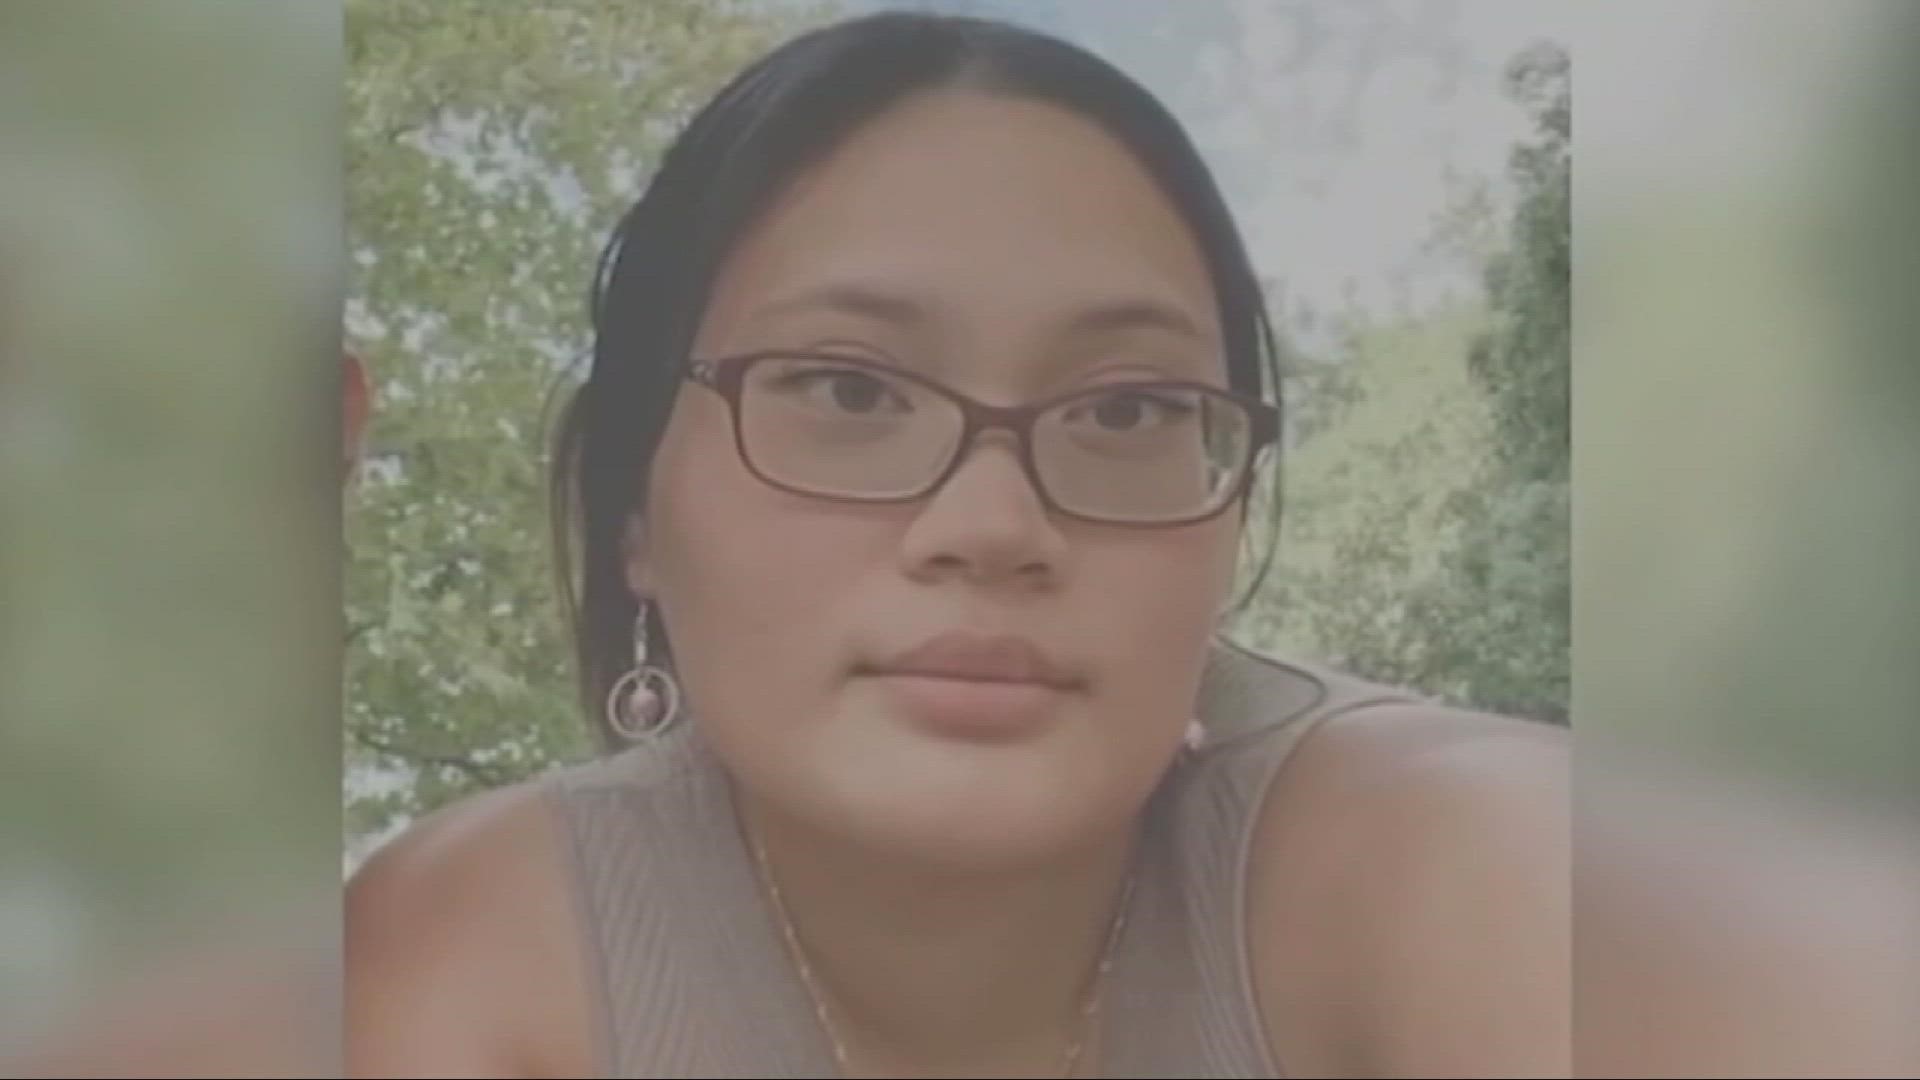 The found partial remains were identified to be that of Alexis Gabe, a 24-year-old Oakley woman who went missing in January, according officials.